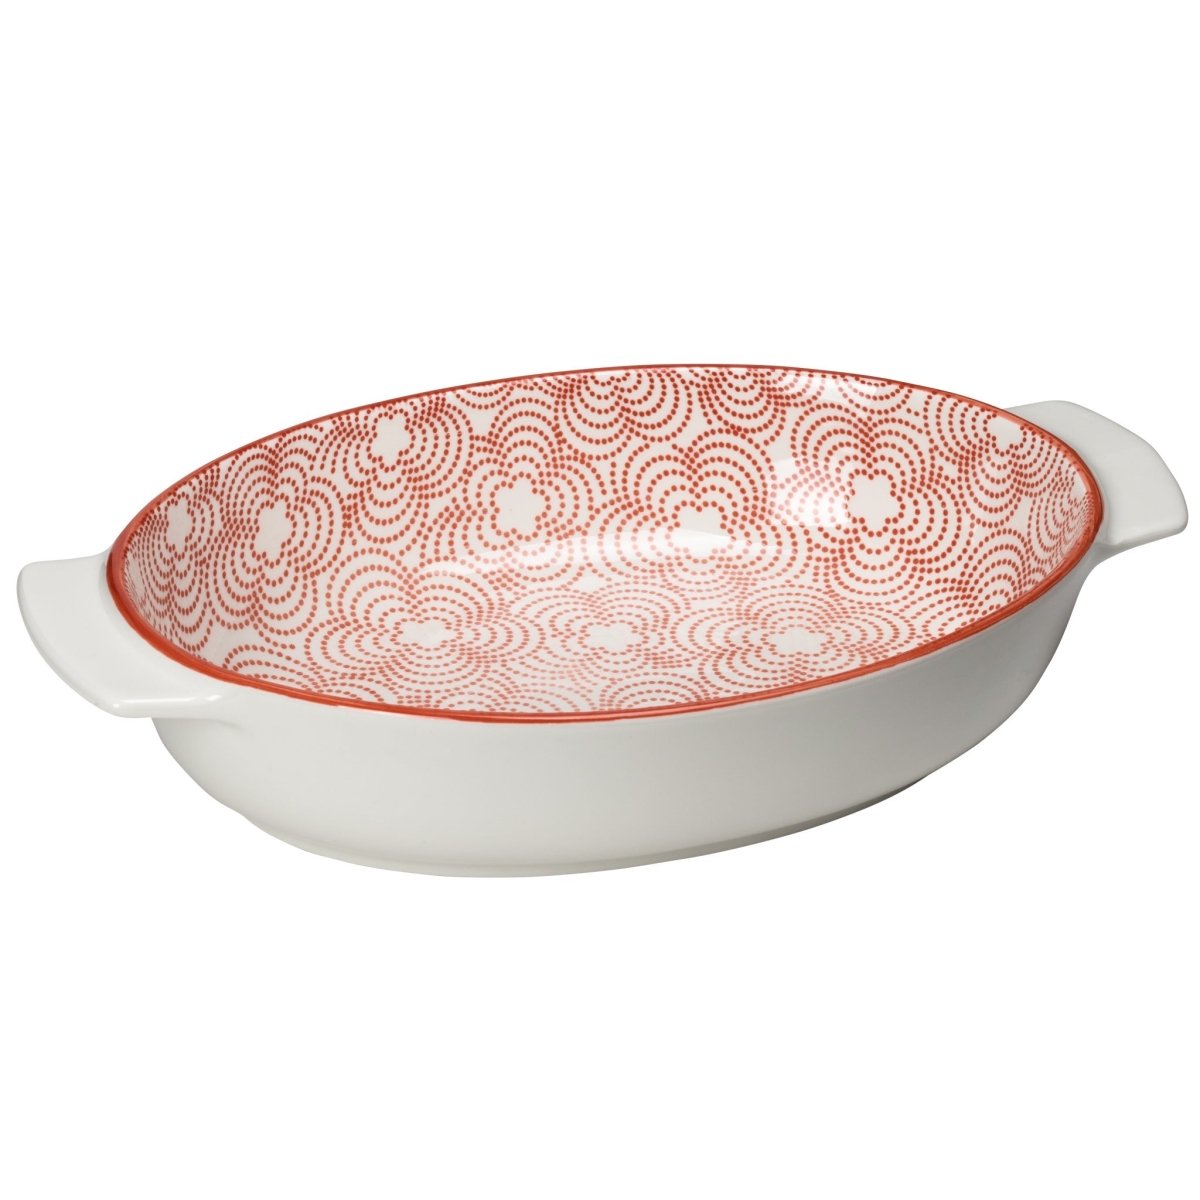 Red with Red Trim kiri Porcelain 12.75L inch Oval Serving Dish - Rustic Furniture Outlet